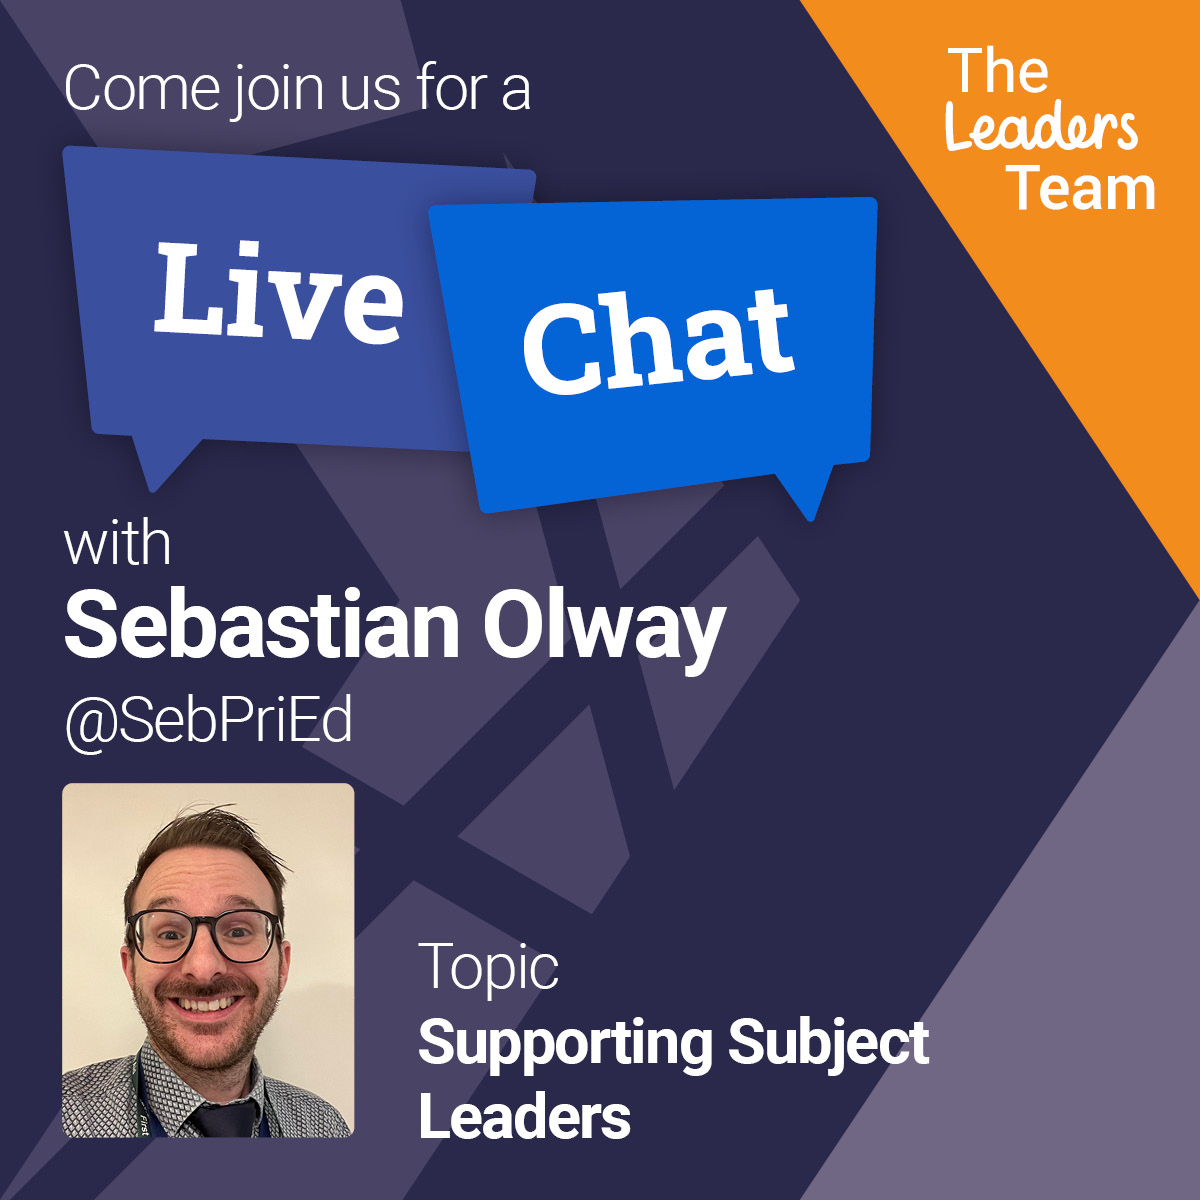 Thank you for joining us tonight for #TheLeadersTeam live chat! Thank you to @TeachersRunClub for being our guest, it was lovely to chat with you! Join us next week as we welcome @SebPriEd as our guest to discuss supporting subject leaders. See you next week 🙂